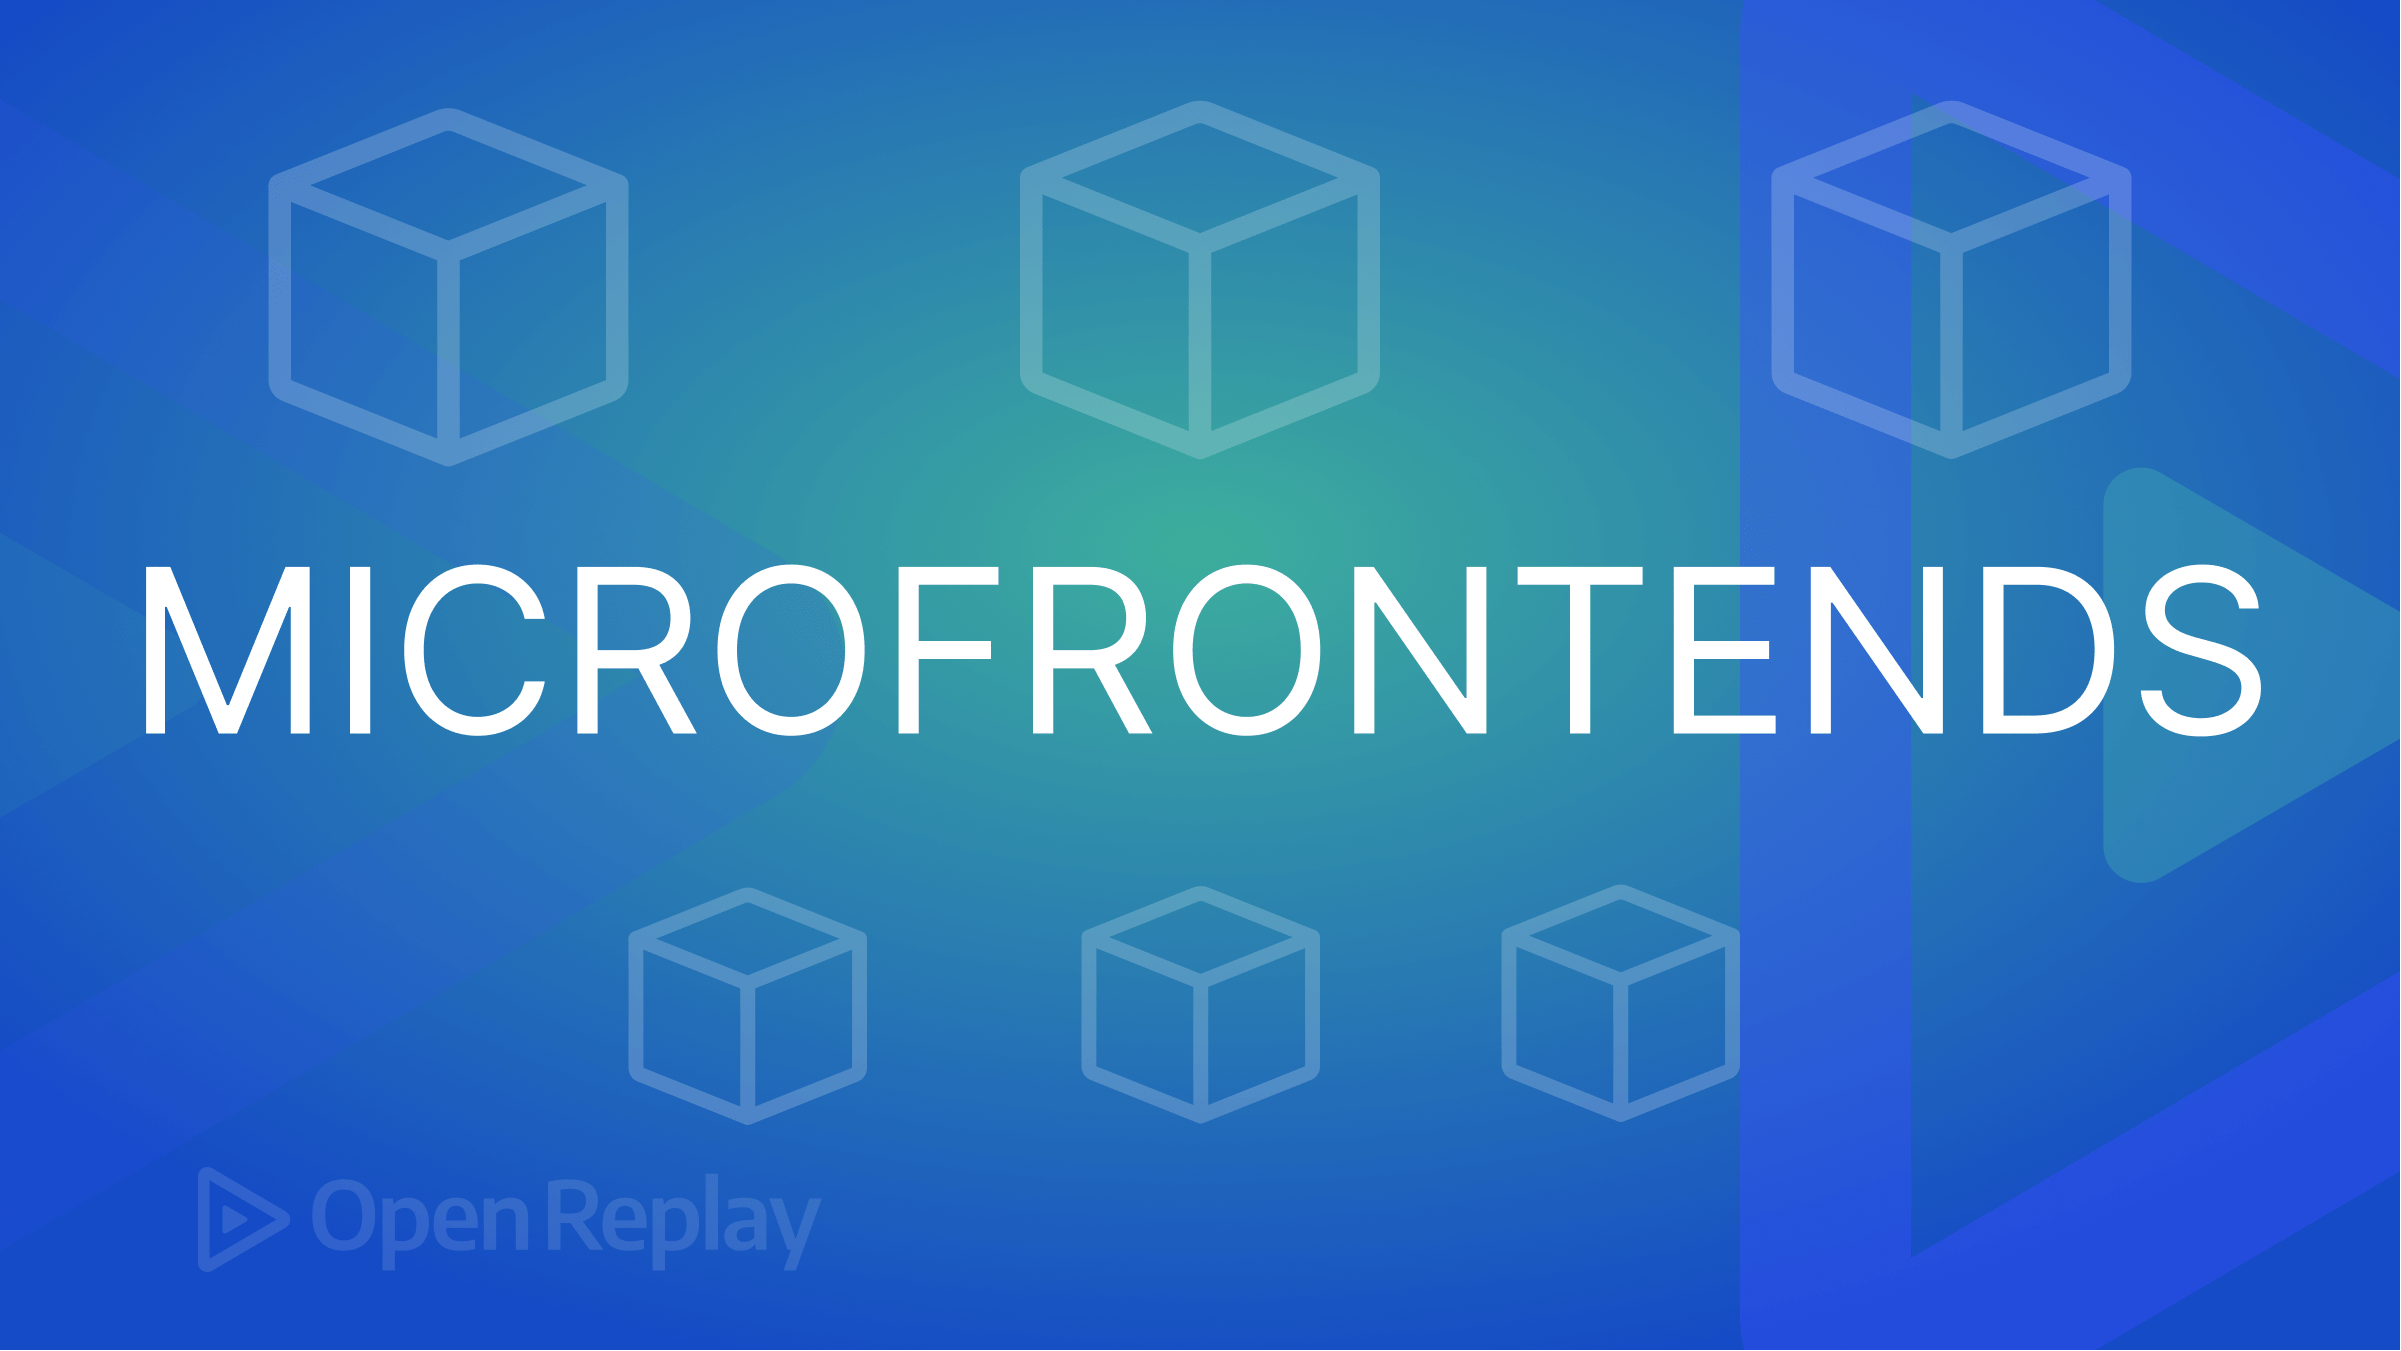 What are micro frontends?